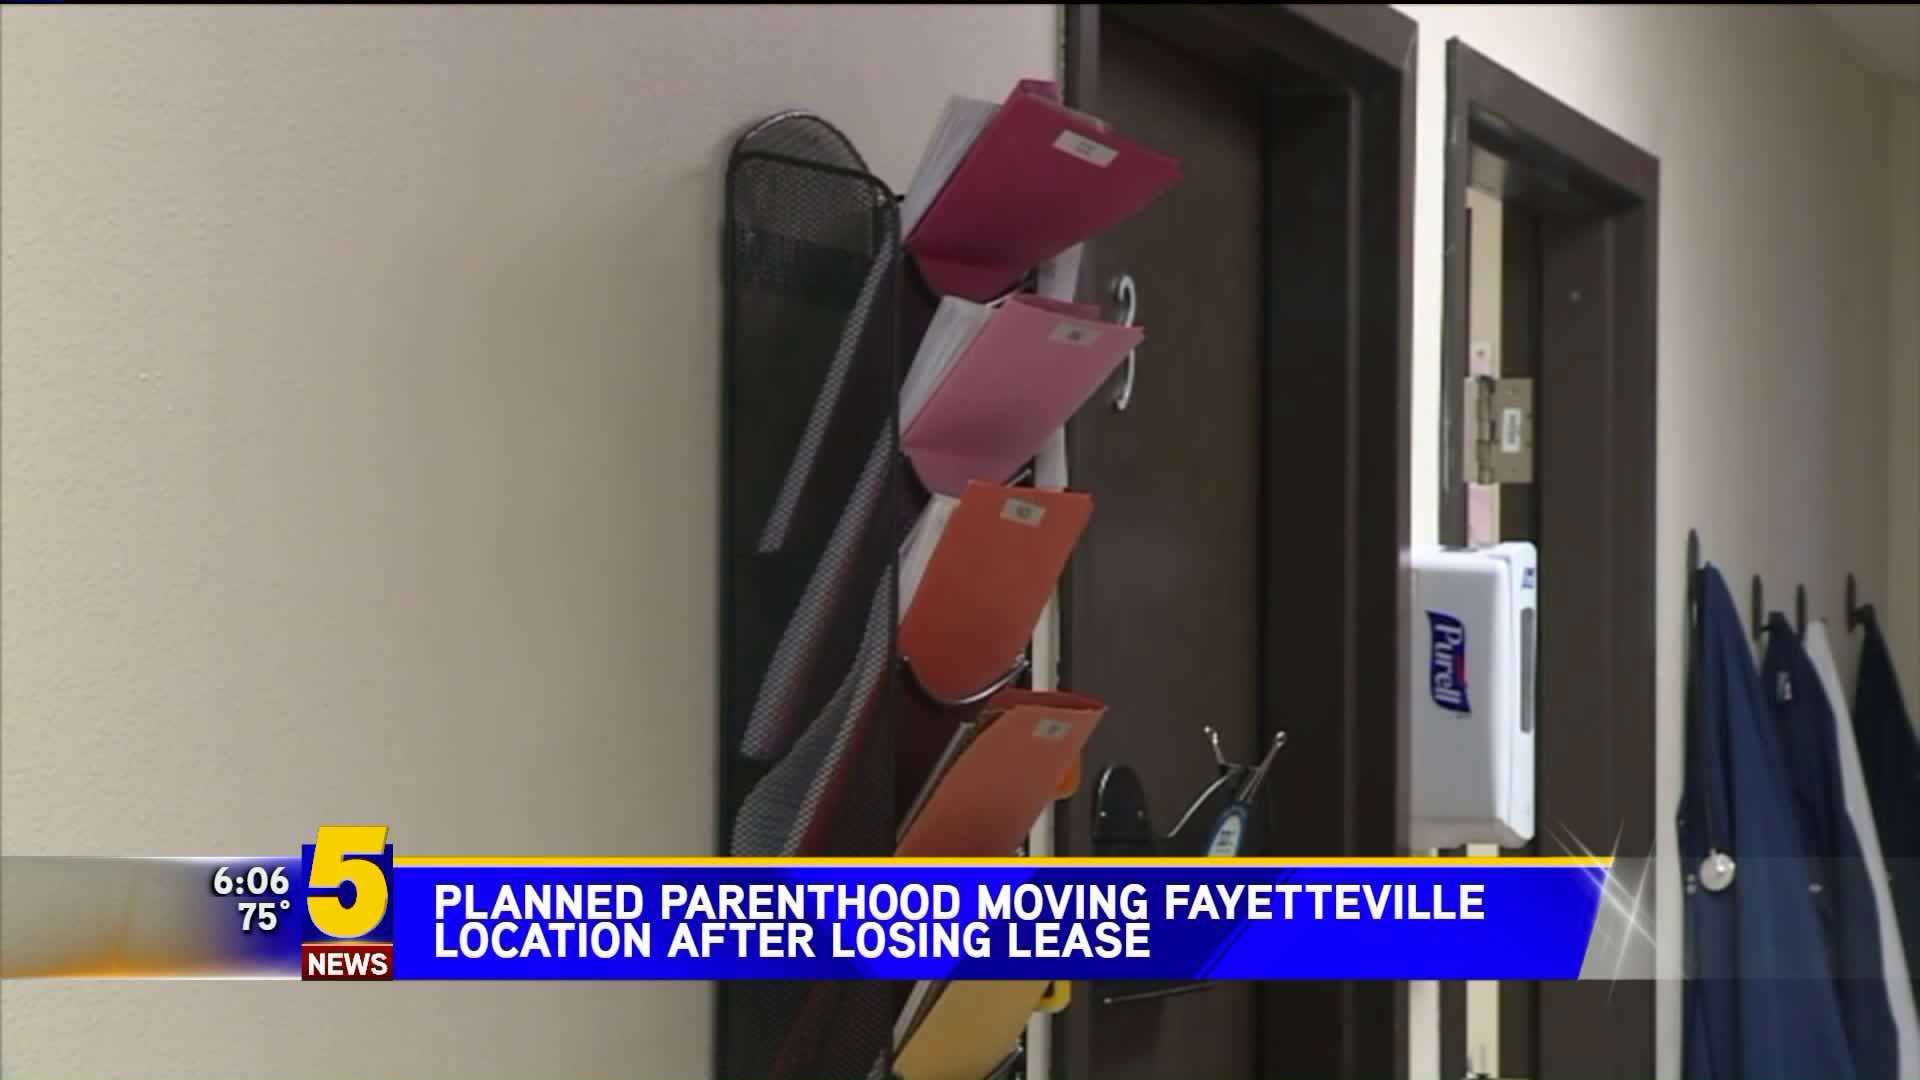 Planned Parenthood Moving Fayetteville Location After Losing Lease